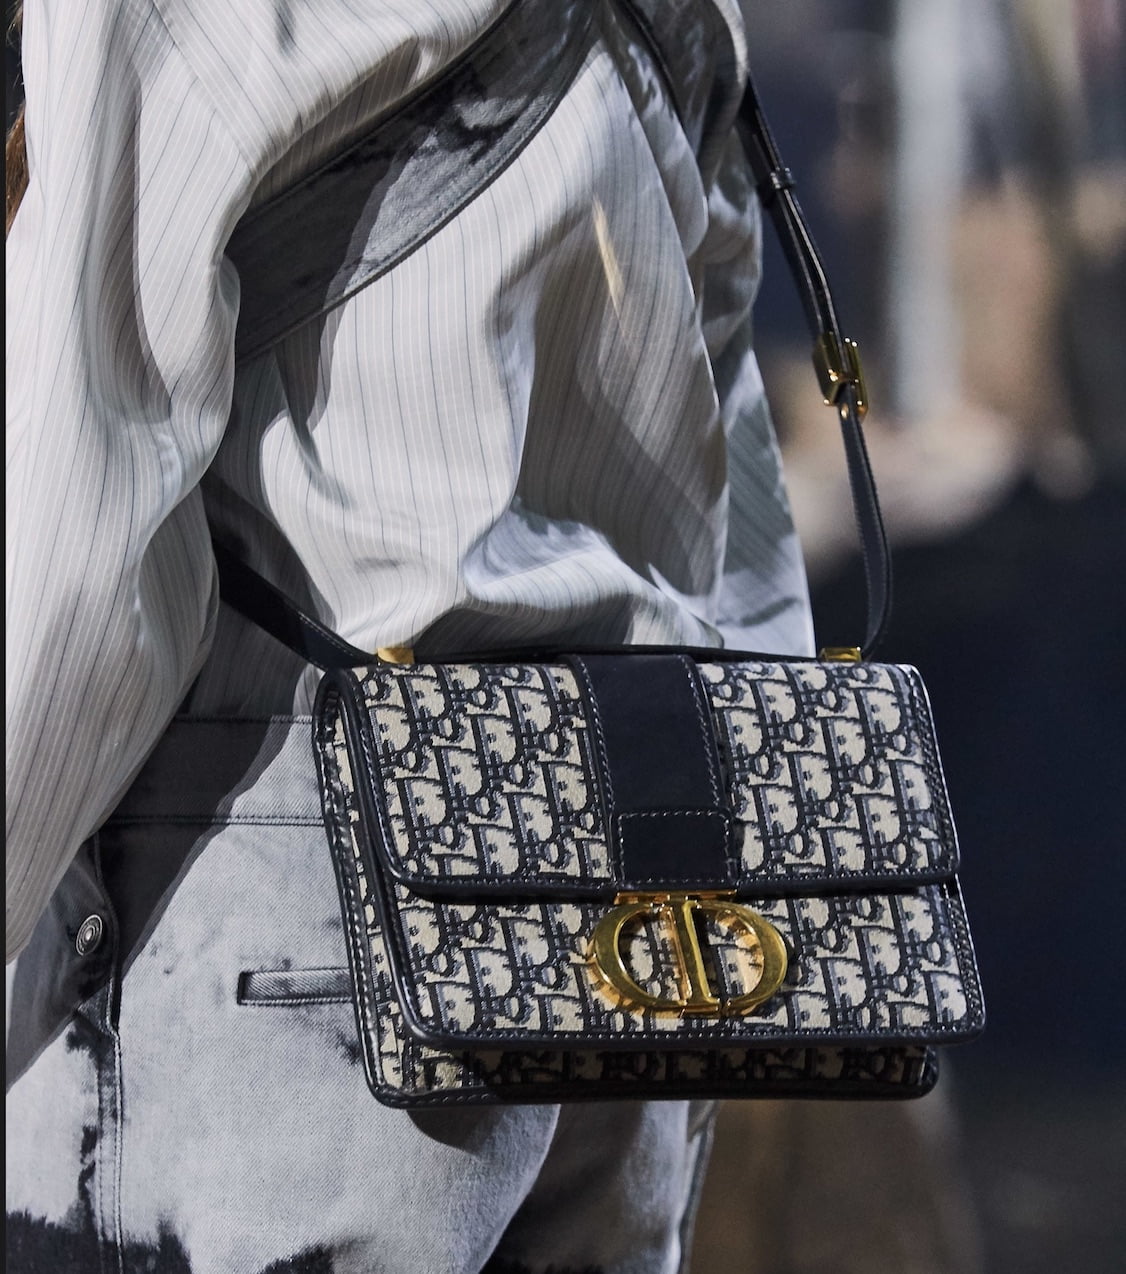 Dior Spring 2020 Introduces The Book Tote in a Smaller Size